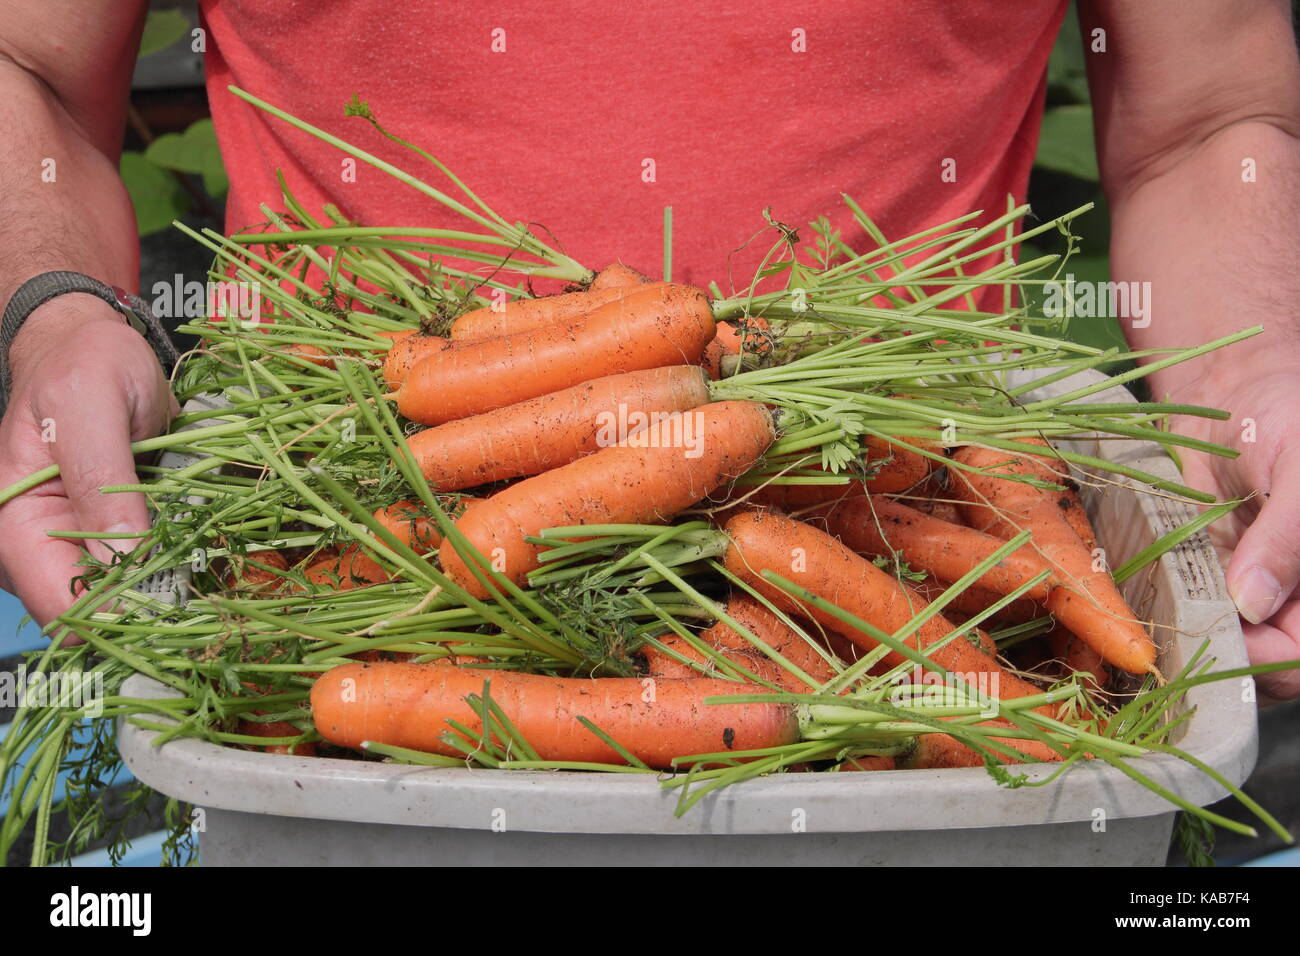 Freshly harvested home grown 'Nairobi' variety carrots are carried by a gardener through an allotment gardens in late summer (August) ,UK Stock Photo